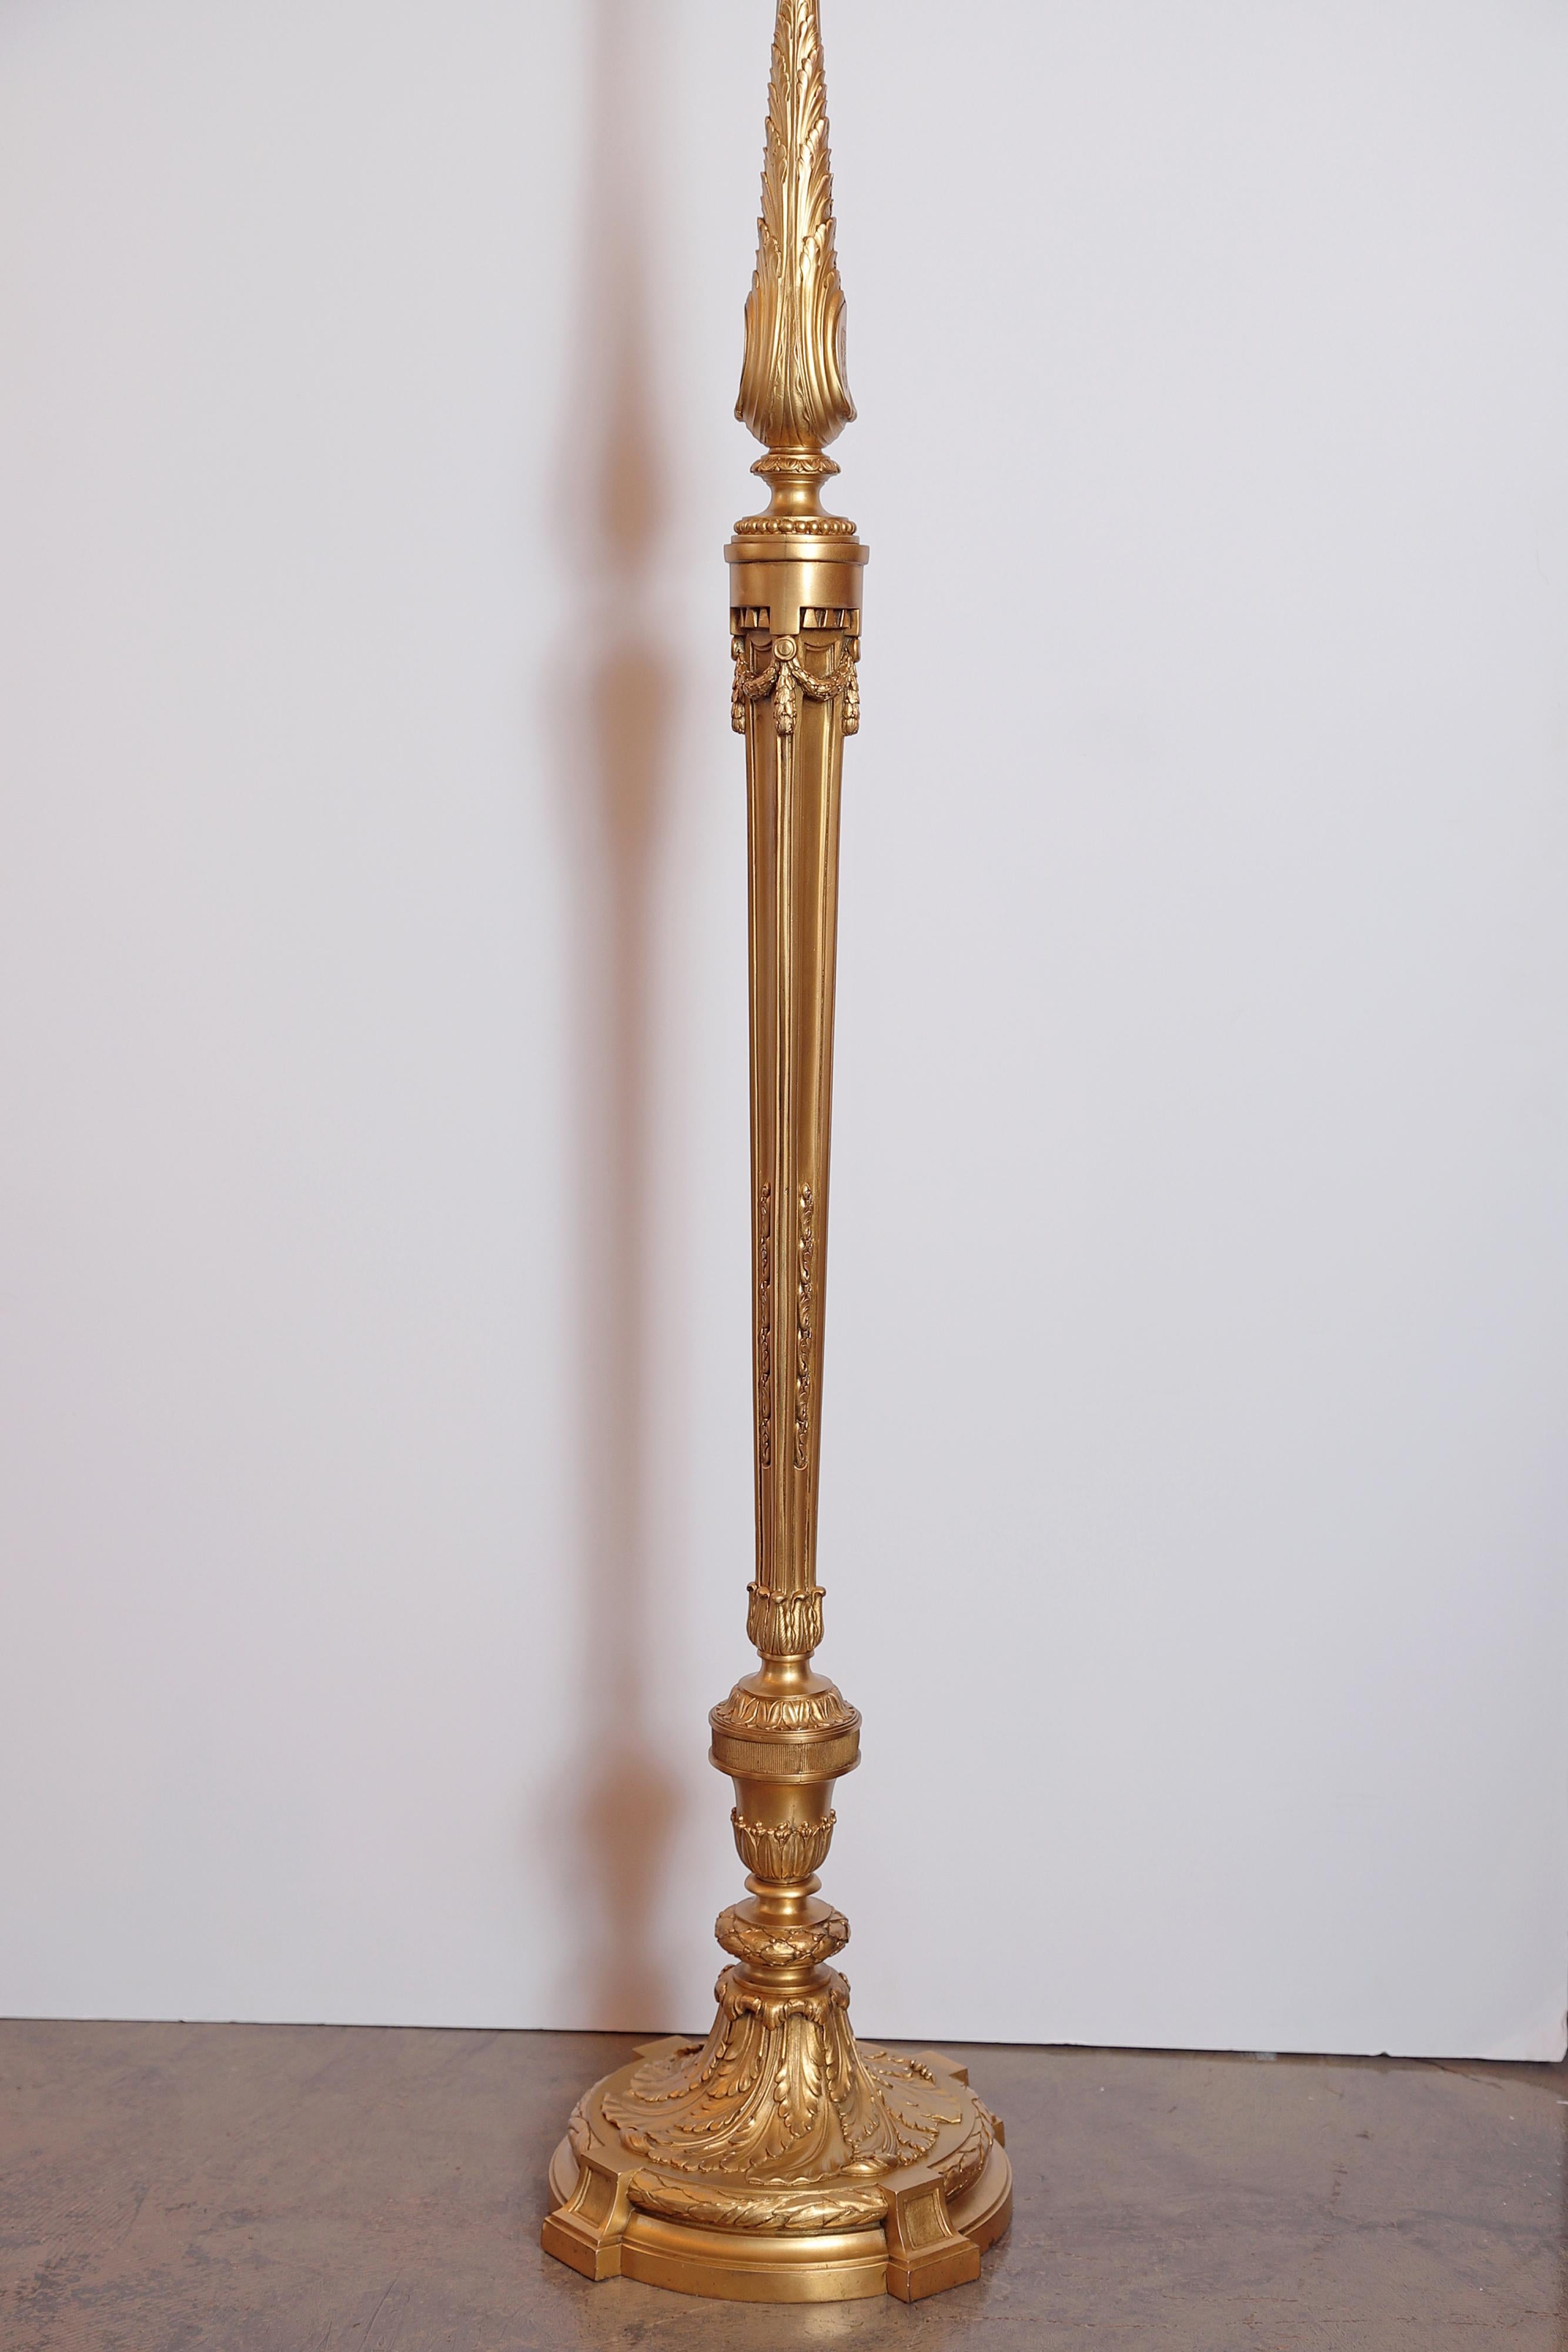 19th century French finely detailed Louis XVI gilt bronze floor lamp. Great quality custom wired and shaded.